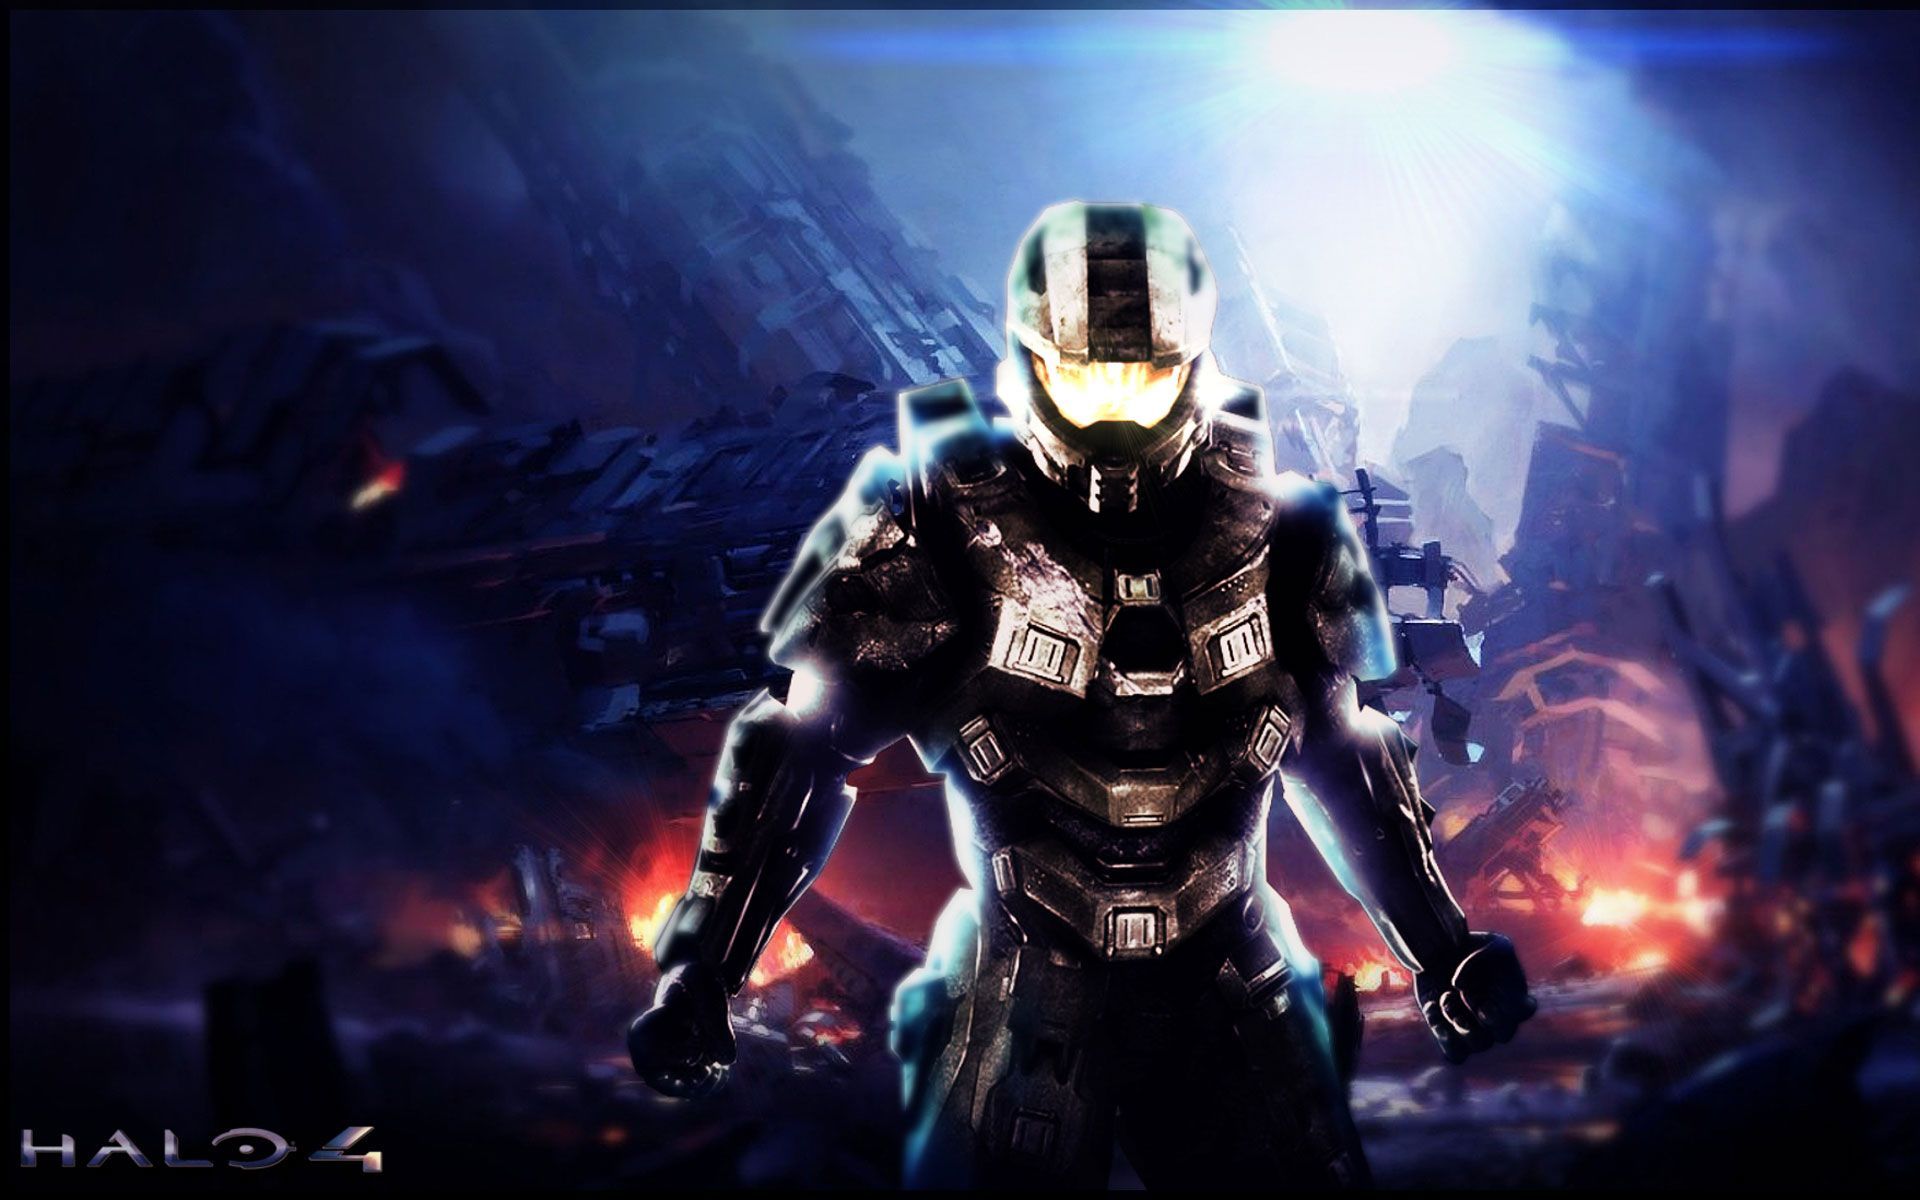 Halo 4 Wallpapers - SD HD - Gaming Now